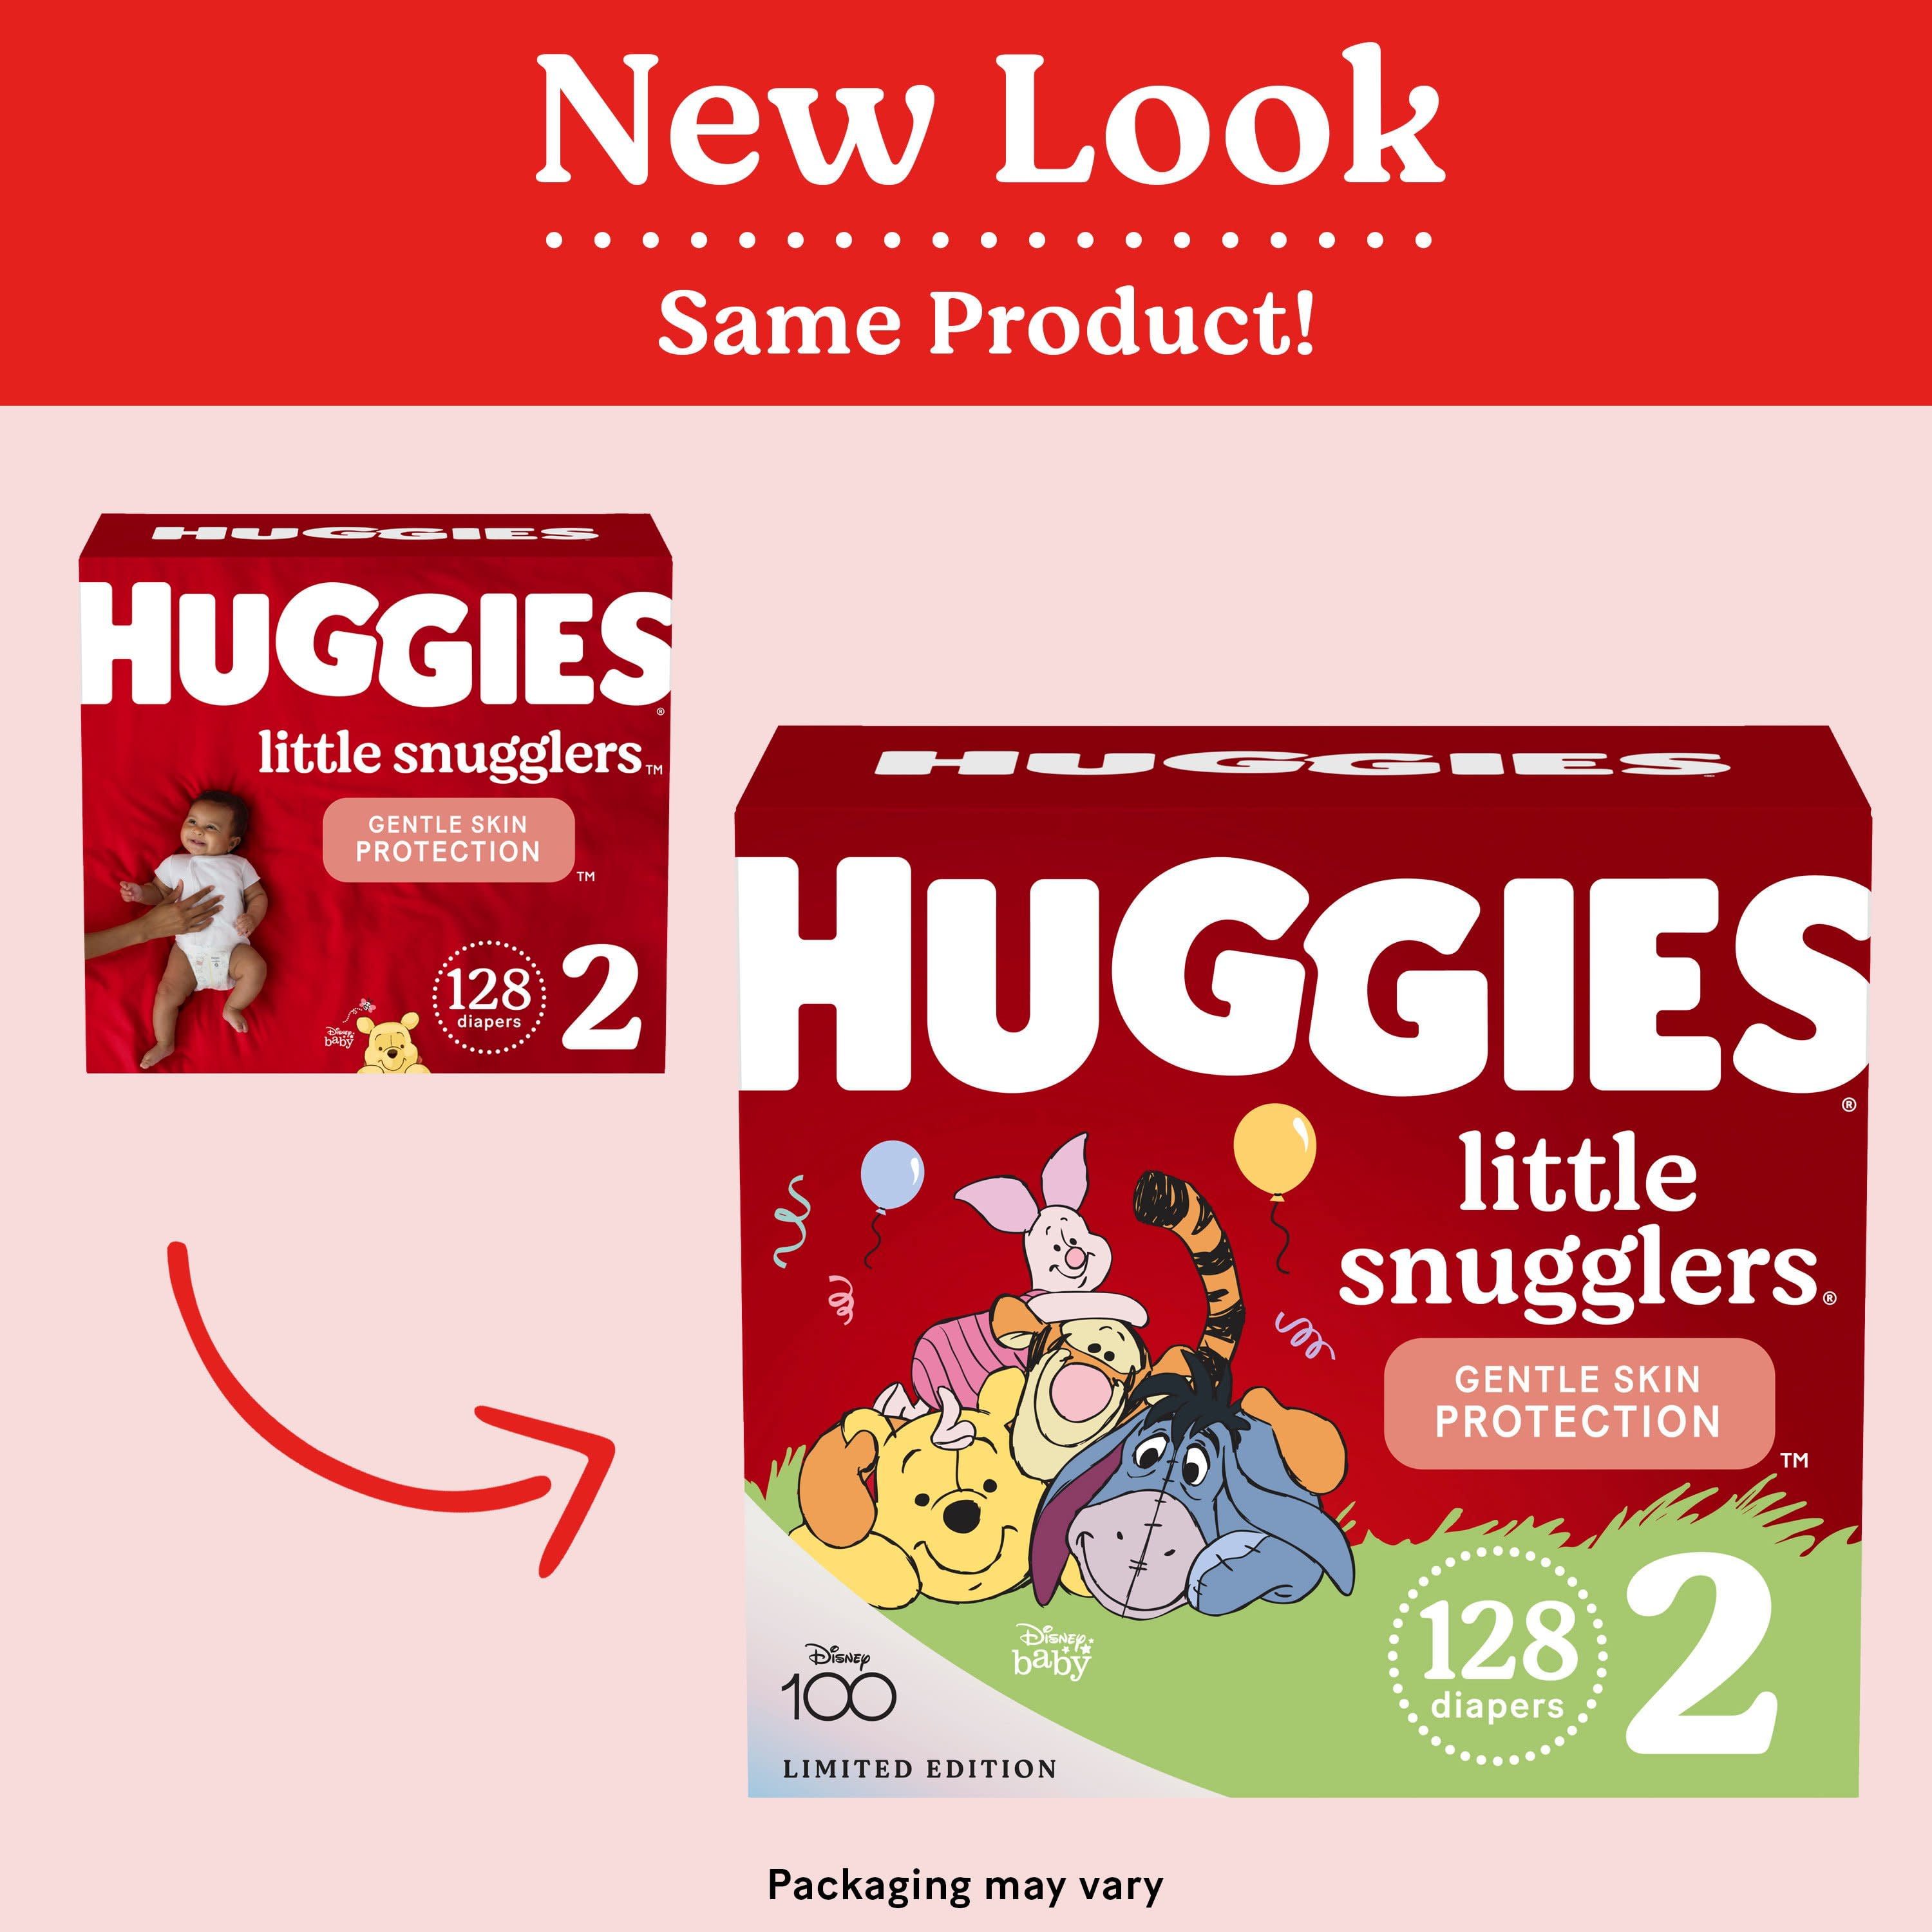  Huggies Little Snugglers Baby Diapers, Size 2, 180 Ct & Size 3,  156 Ct, One Month Supply with Gift Card : Baby